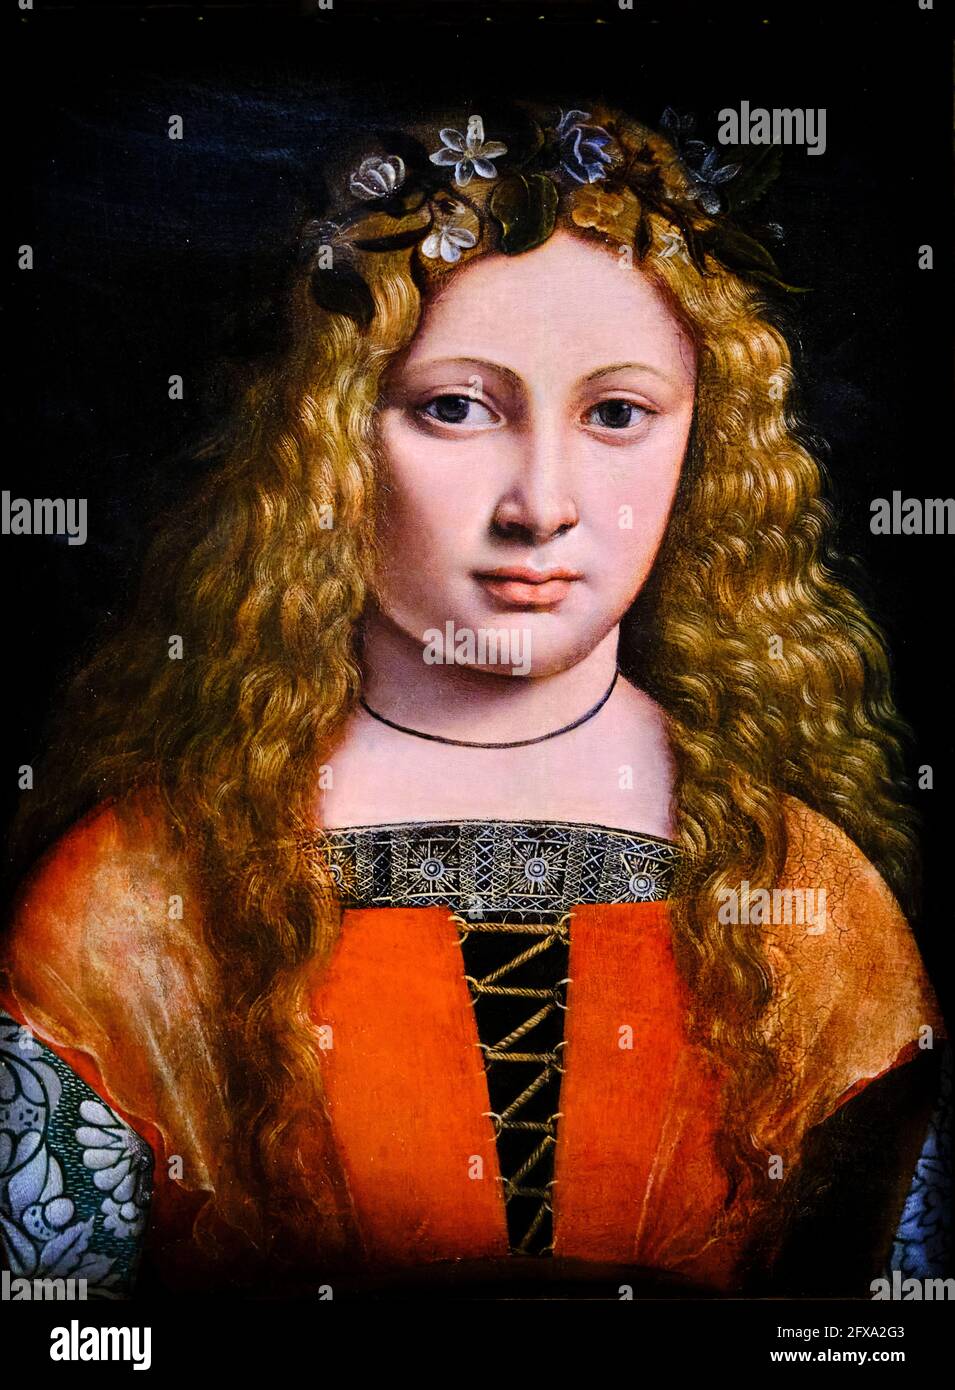 United States, Raleigh, North Carolina Museum of Art, Giovanni Antonio Boltraffio, Girl crowned with flowers Stock Photo